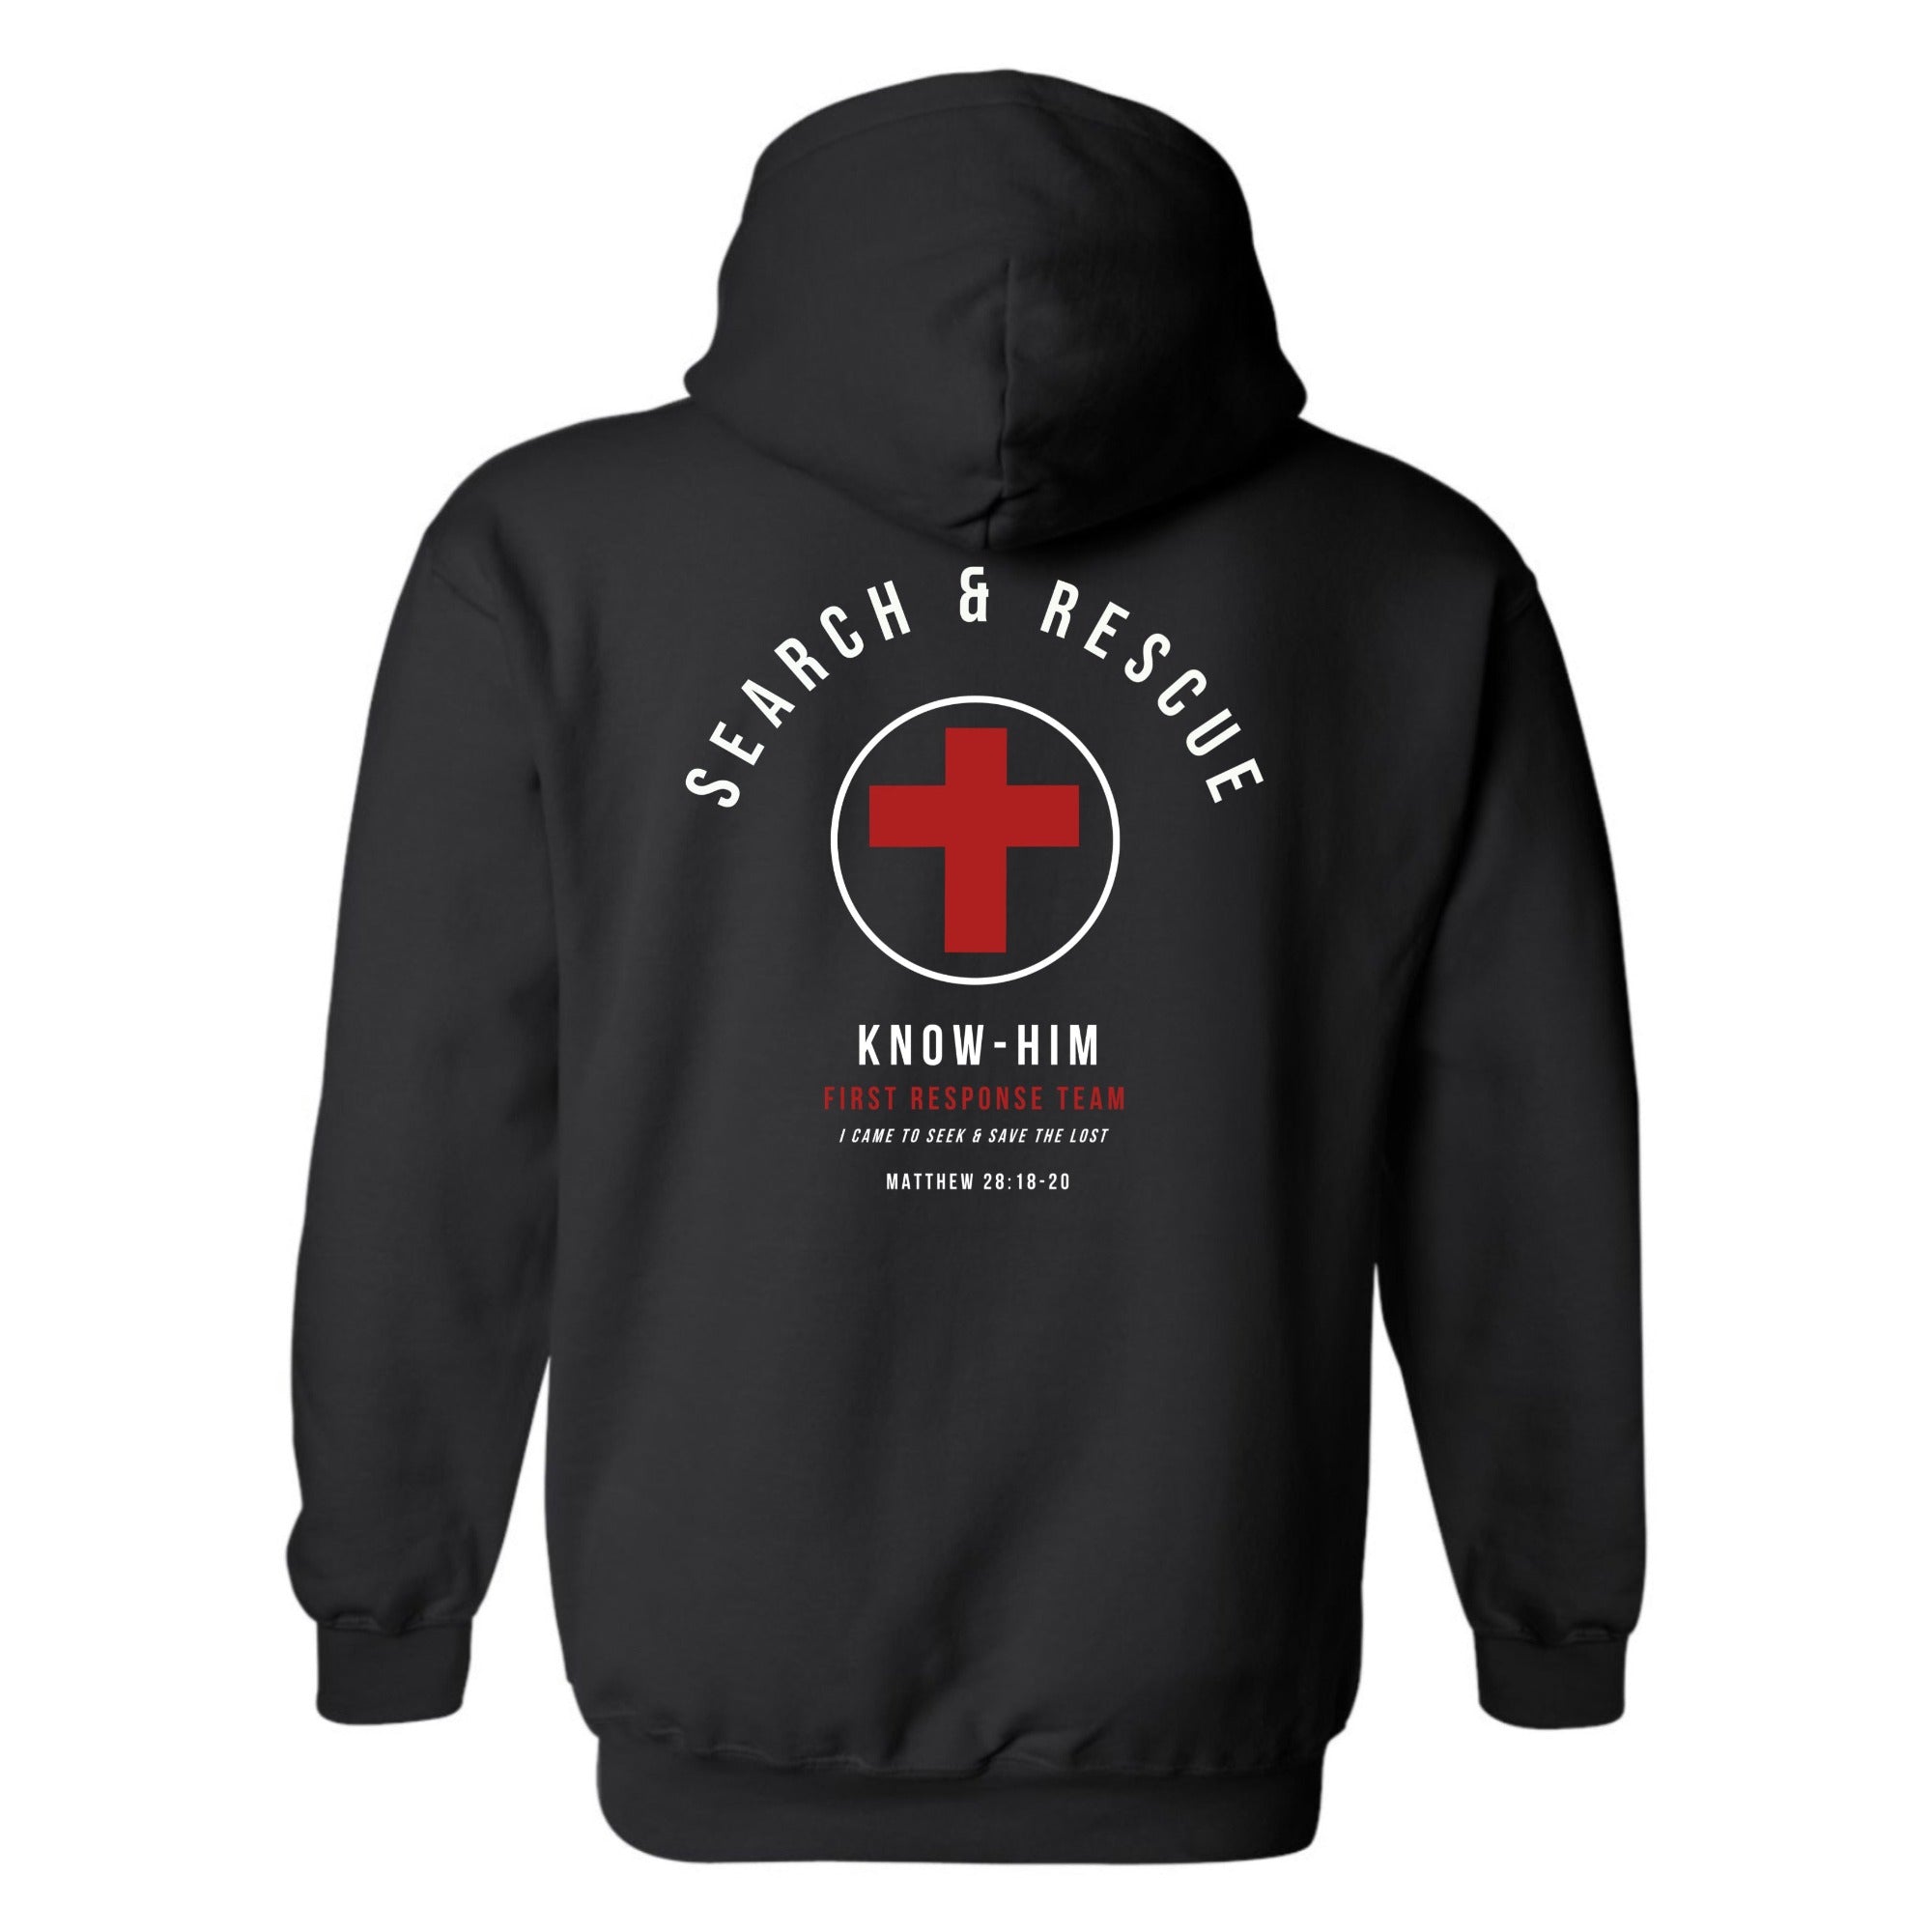 Search and Rescue (Black) - Hoodie